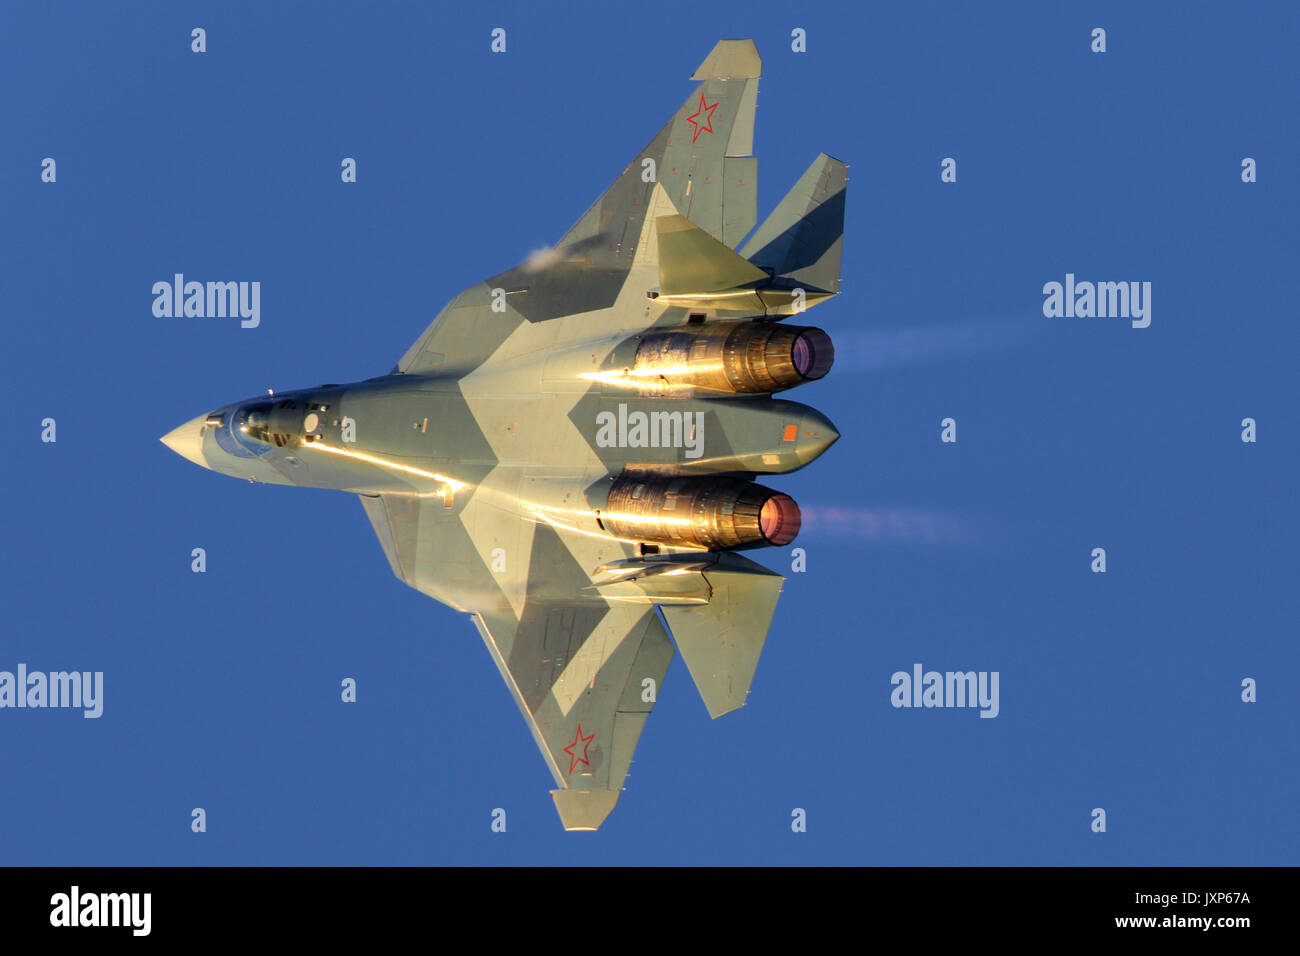 Zhukovsky, Moscow Region, Russia - August 20, 2015: Sukhoi T-50 PAK-FA 054 BLUE of russian air force perfoming demonstration flight in Zhukovsky durin Stock Photo